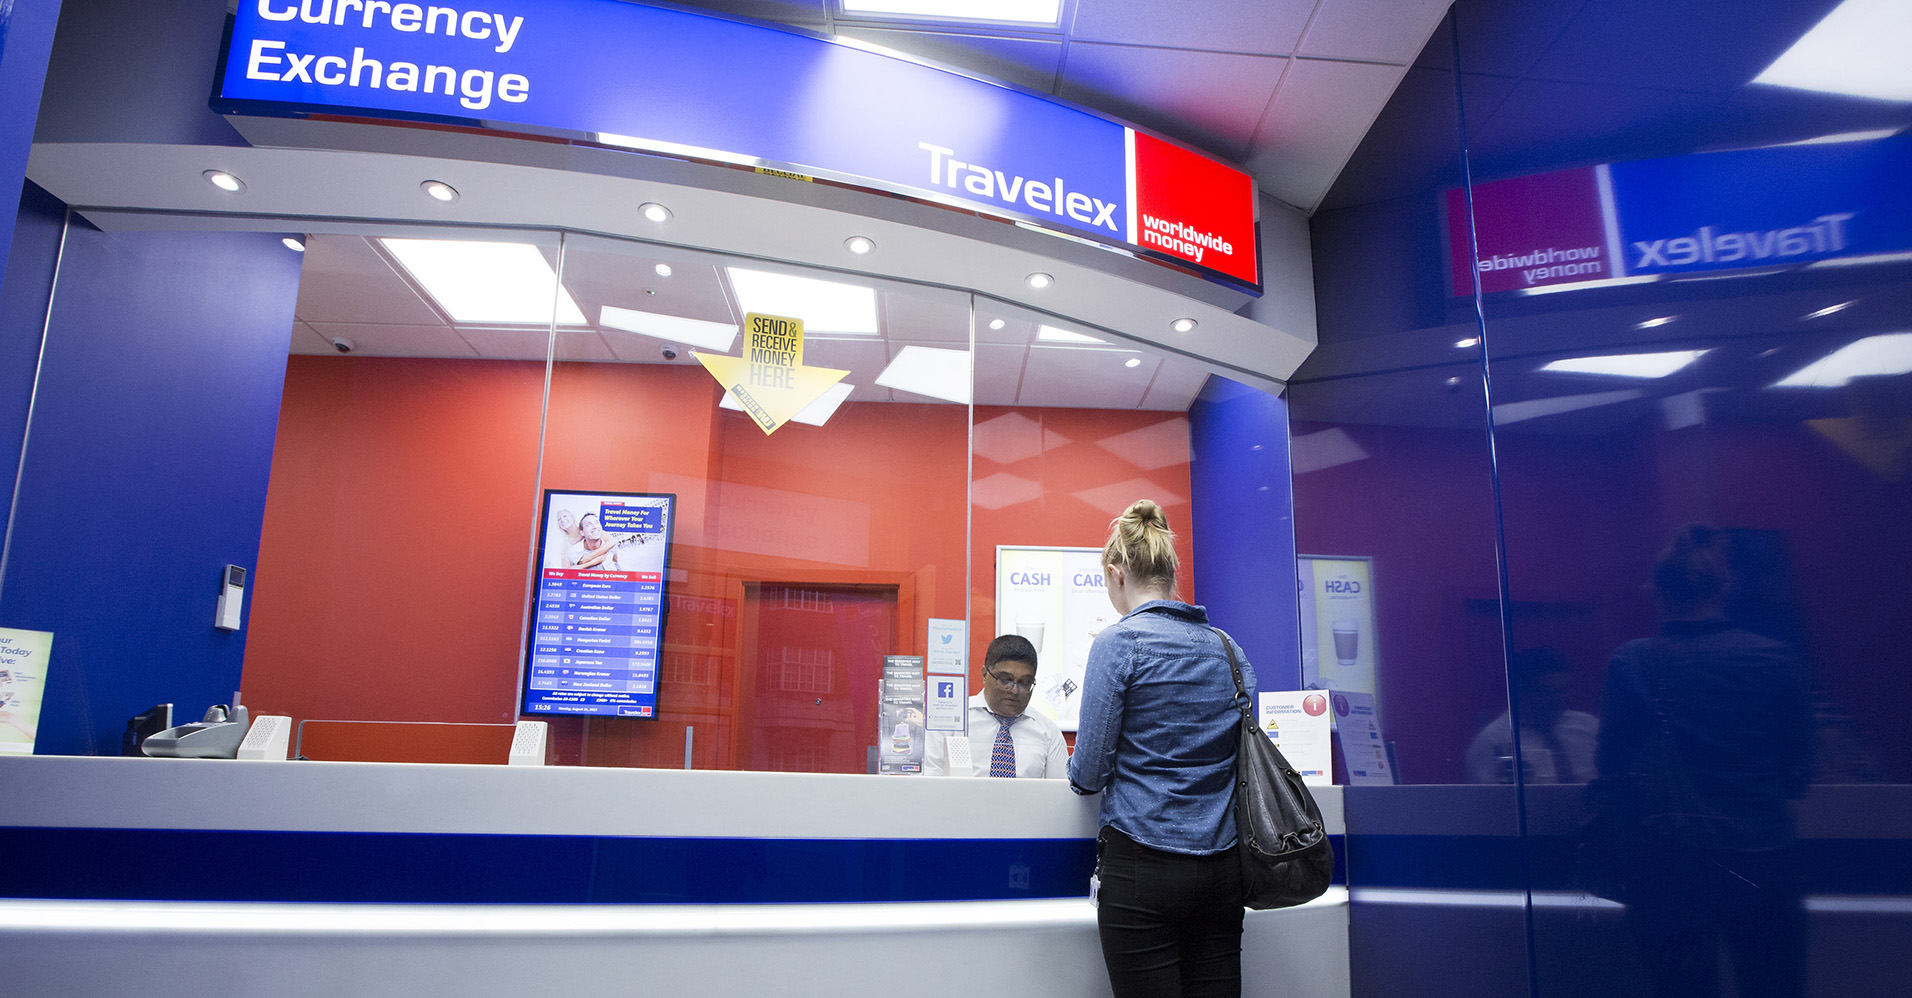 A customer changes currency at a Travelex currency exchange in London.